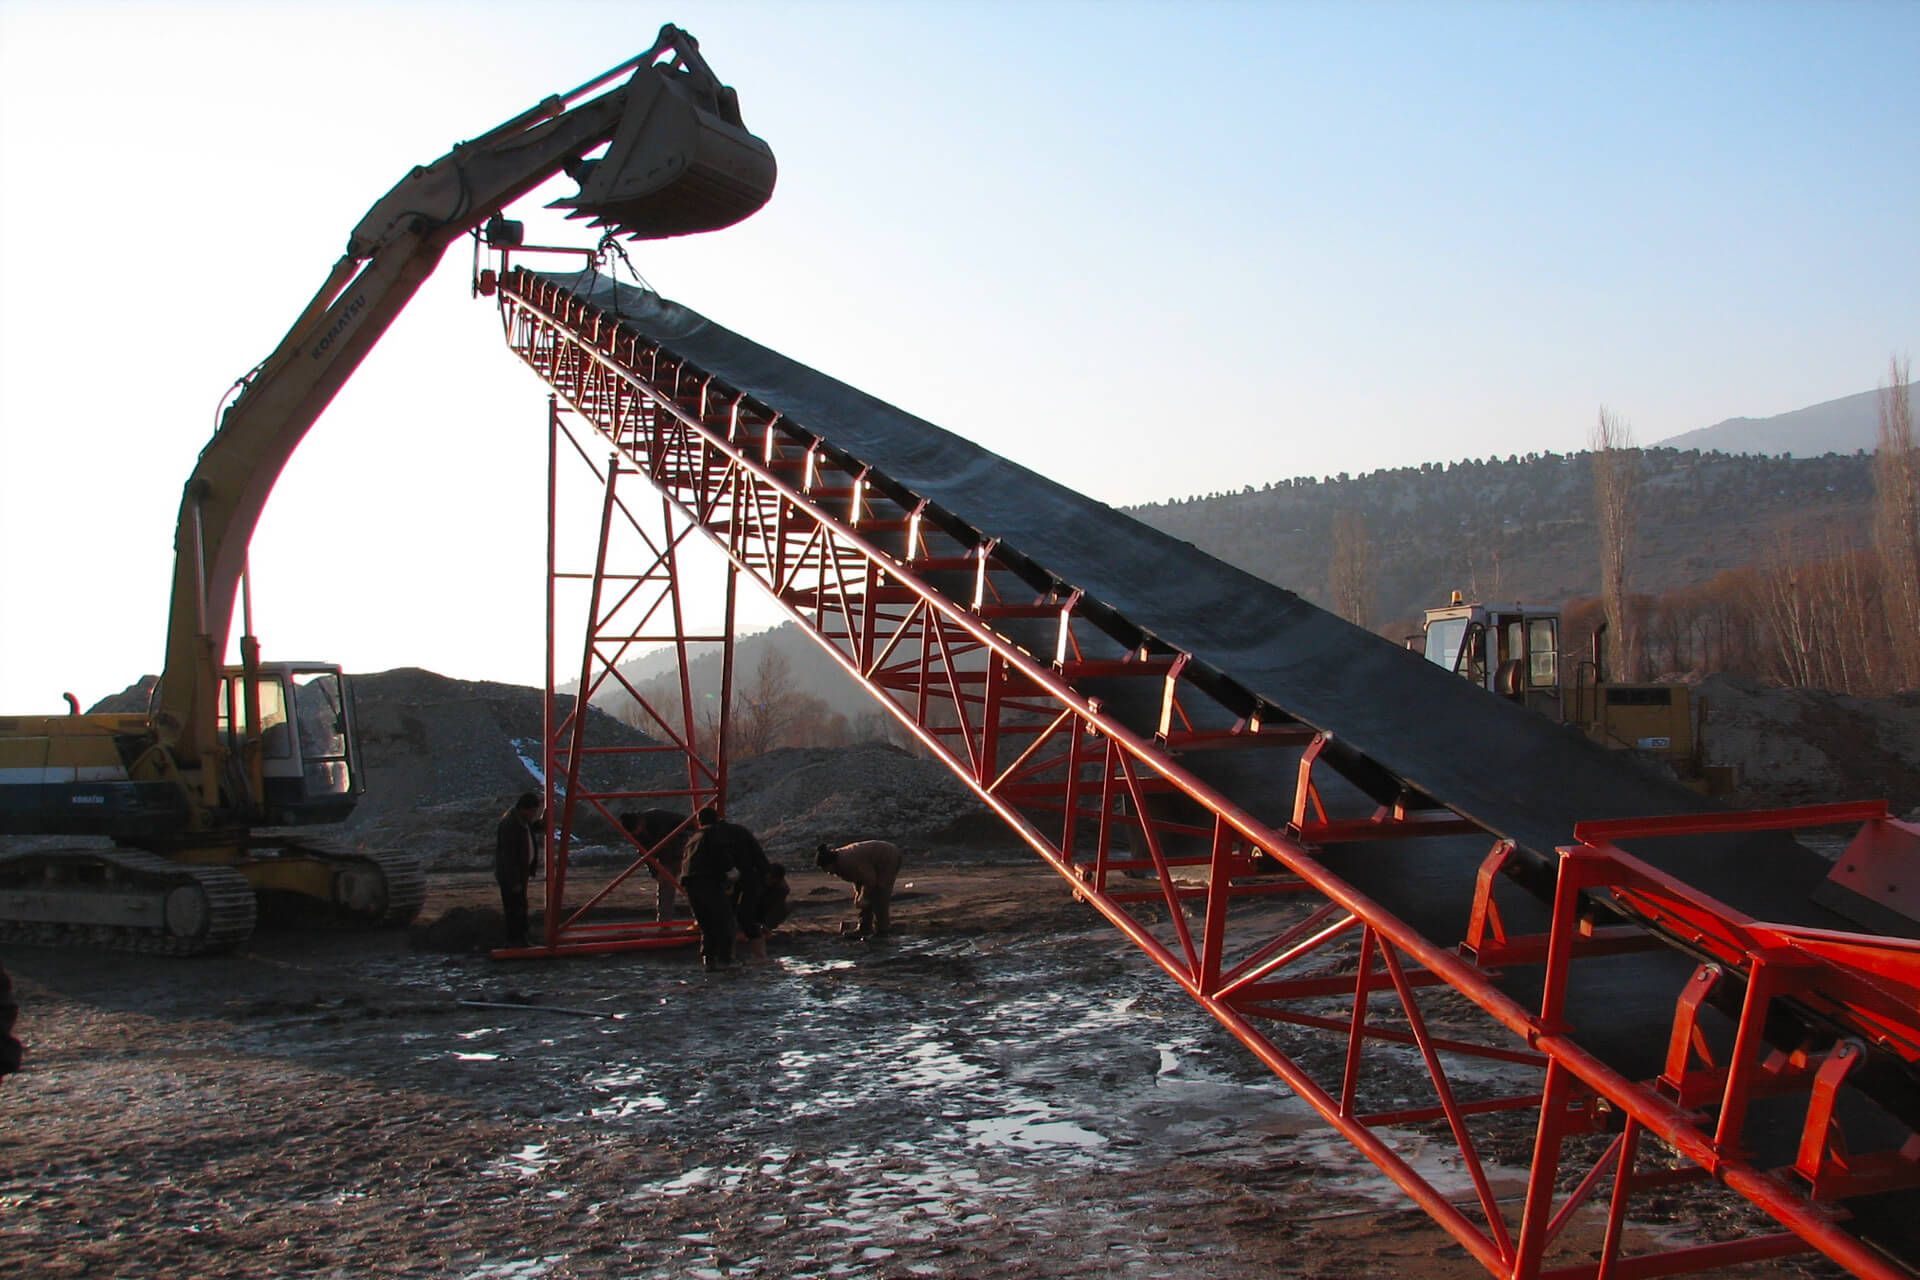 Mining chemicals and equipment